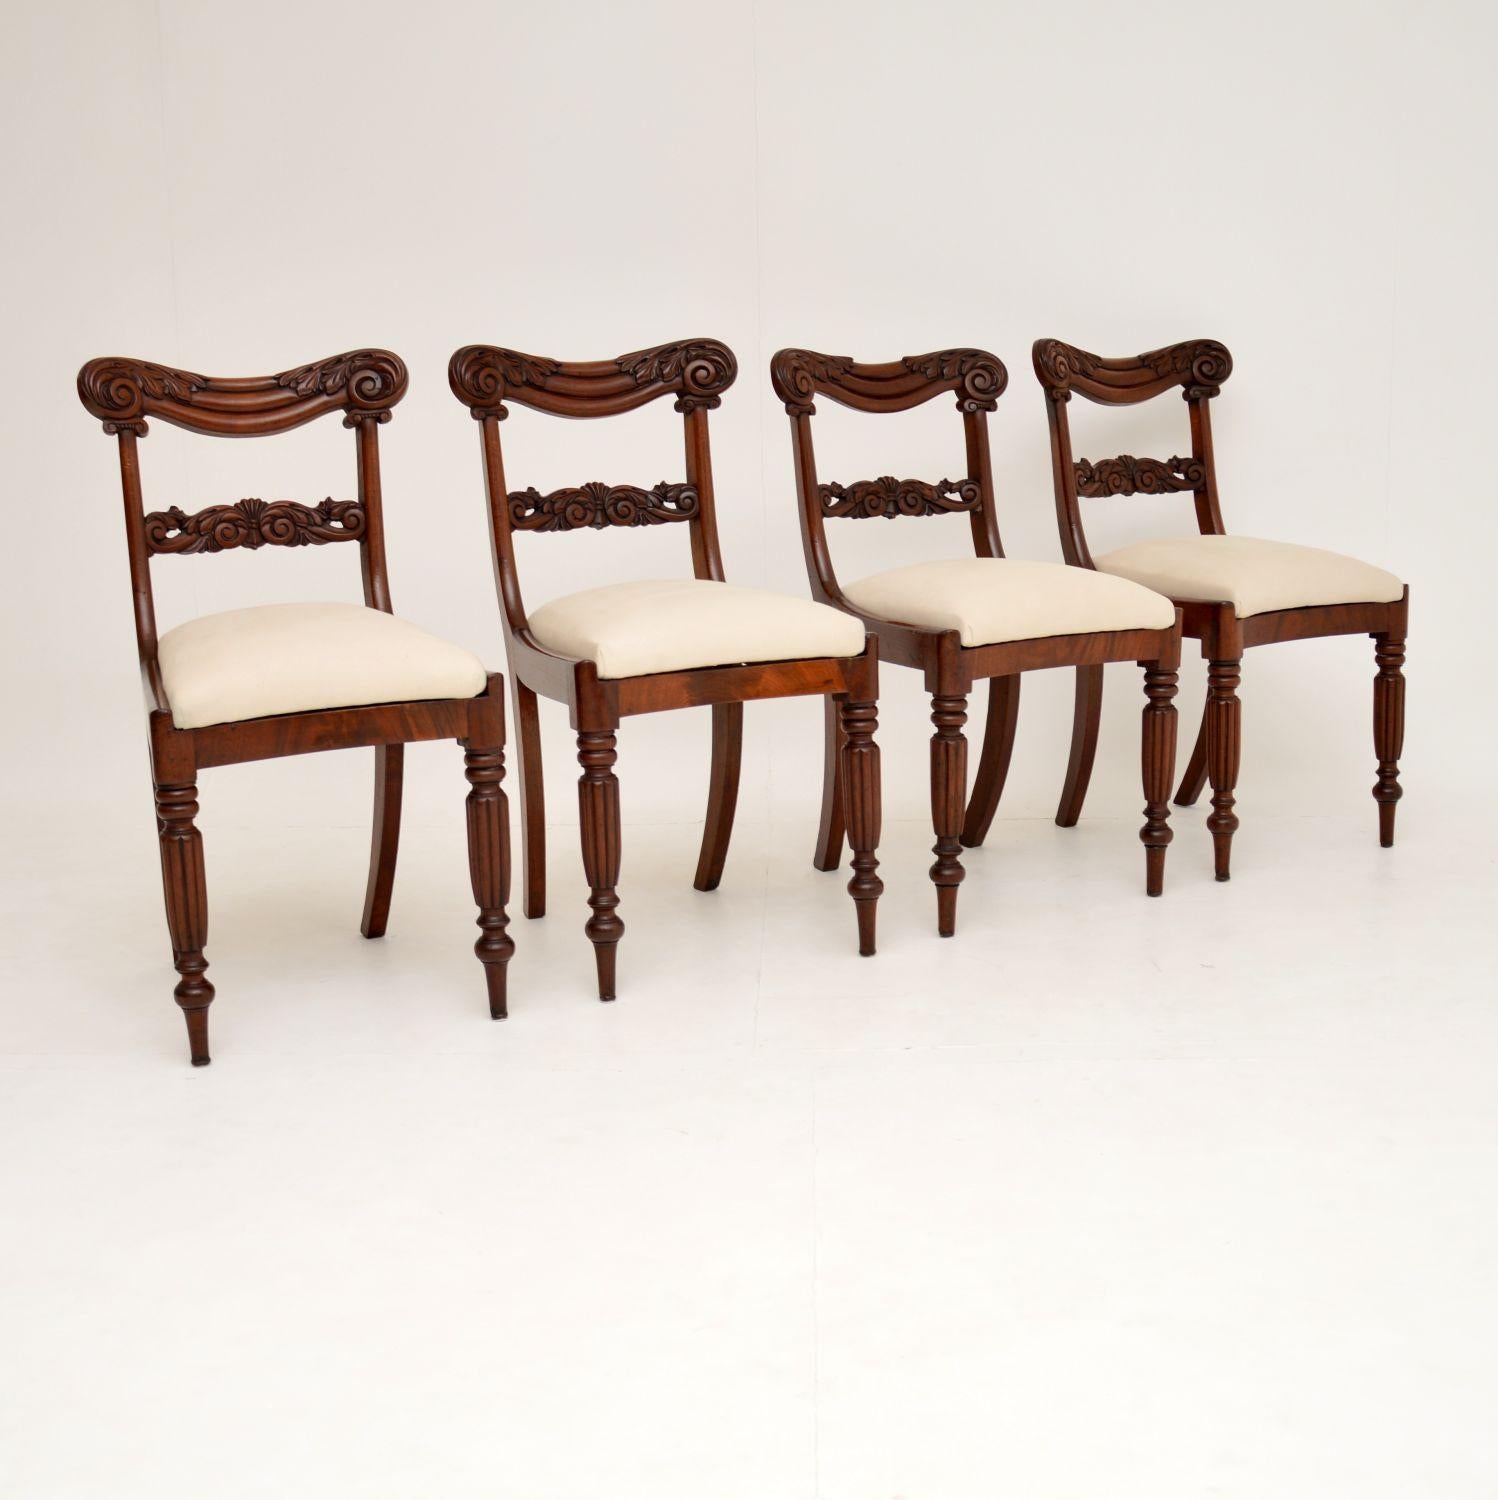 These antique mahogany William IV chairs have to be the nicest design and best quality set I’ve seen. They date from the 1830s period and are in excellent original condition.

Please enlarge all the images, especially the close ups of the backs,